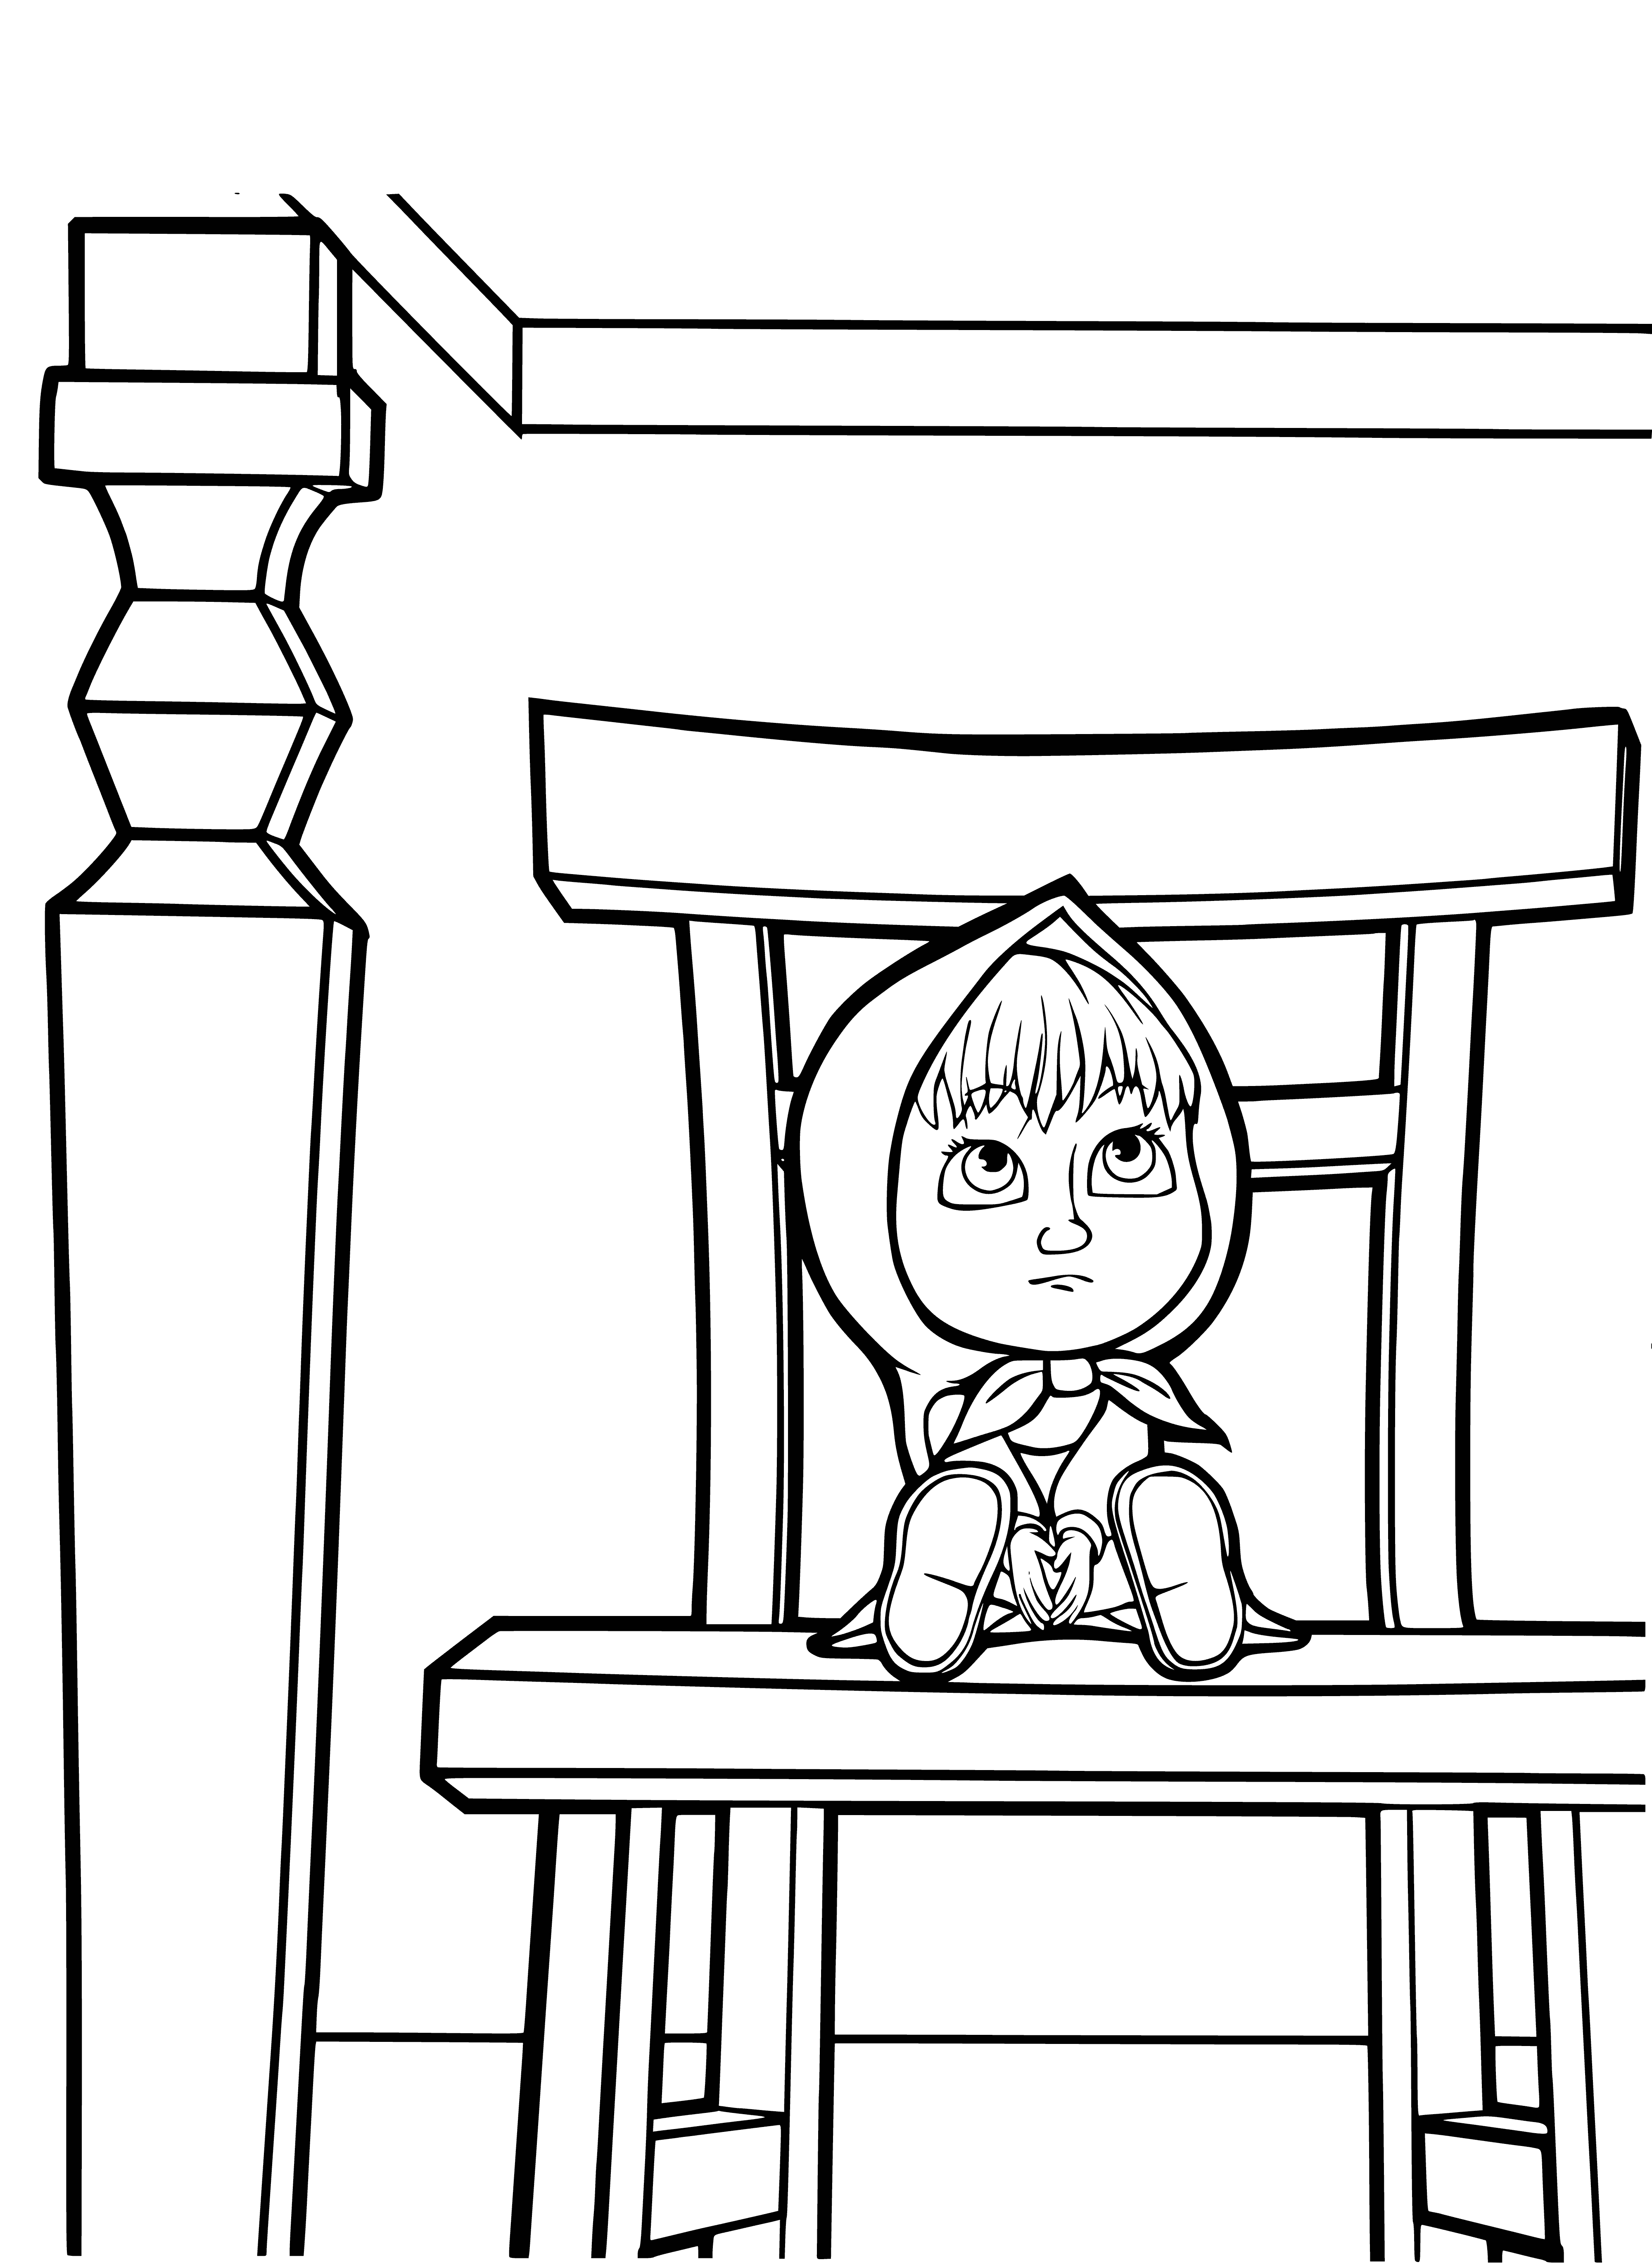 coloring page: Masha sits, worrying, holding a spoon, staring at a bowl of gruel before her.